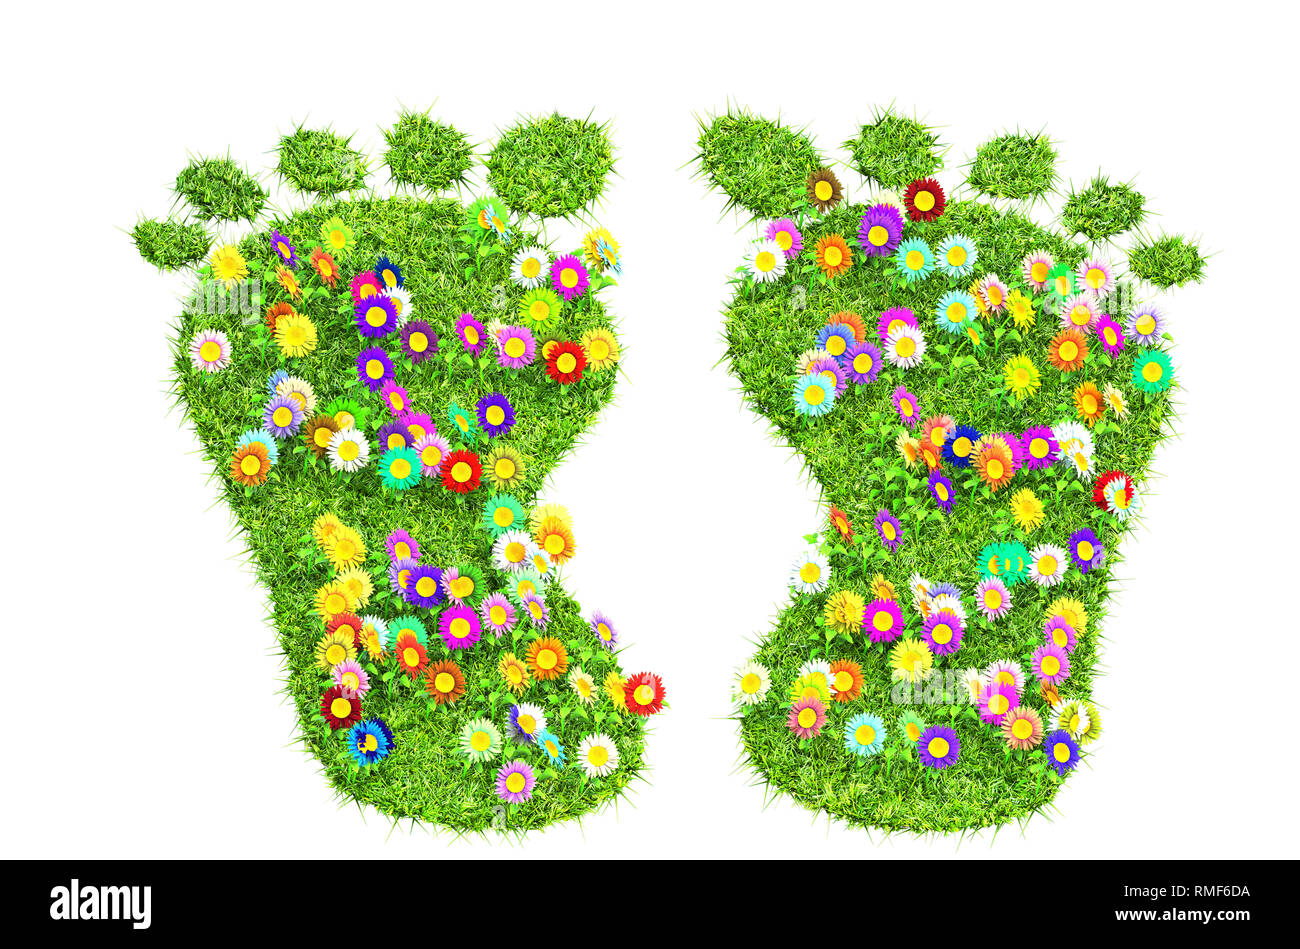 foot print made of green grass and flowers isolated Stock Photo